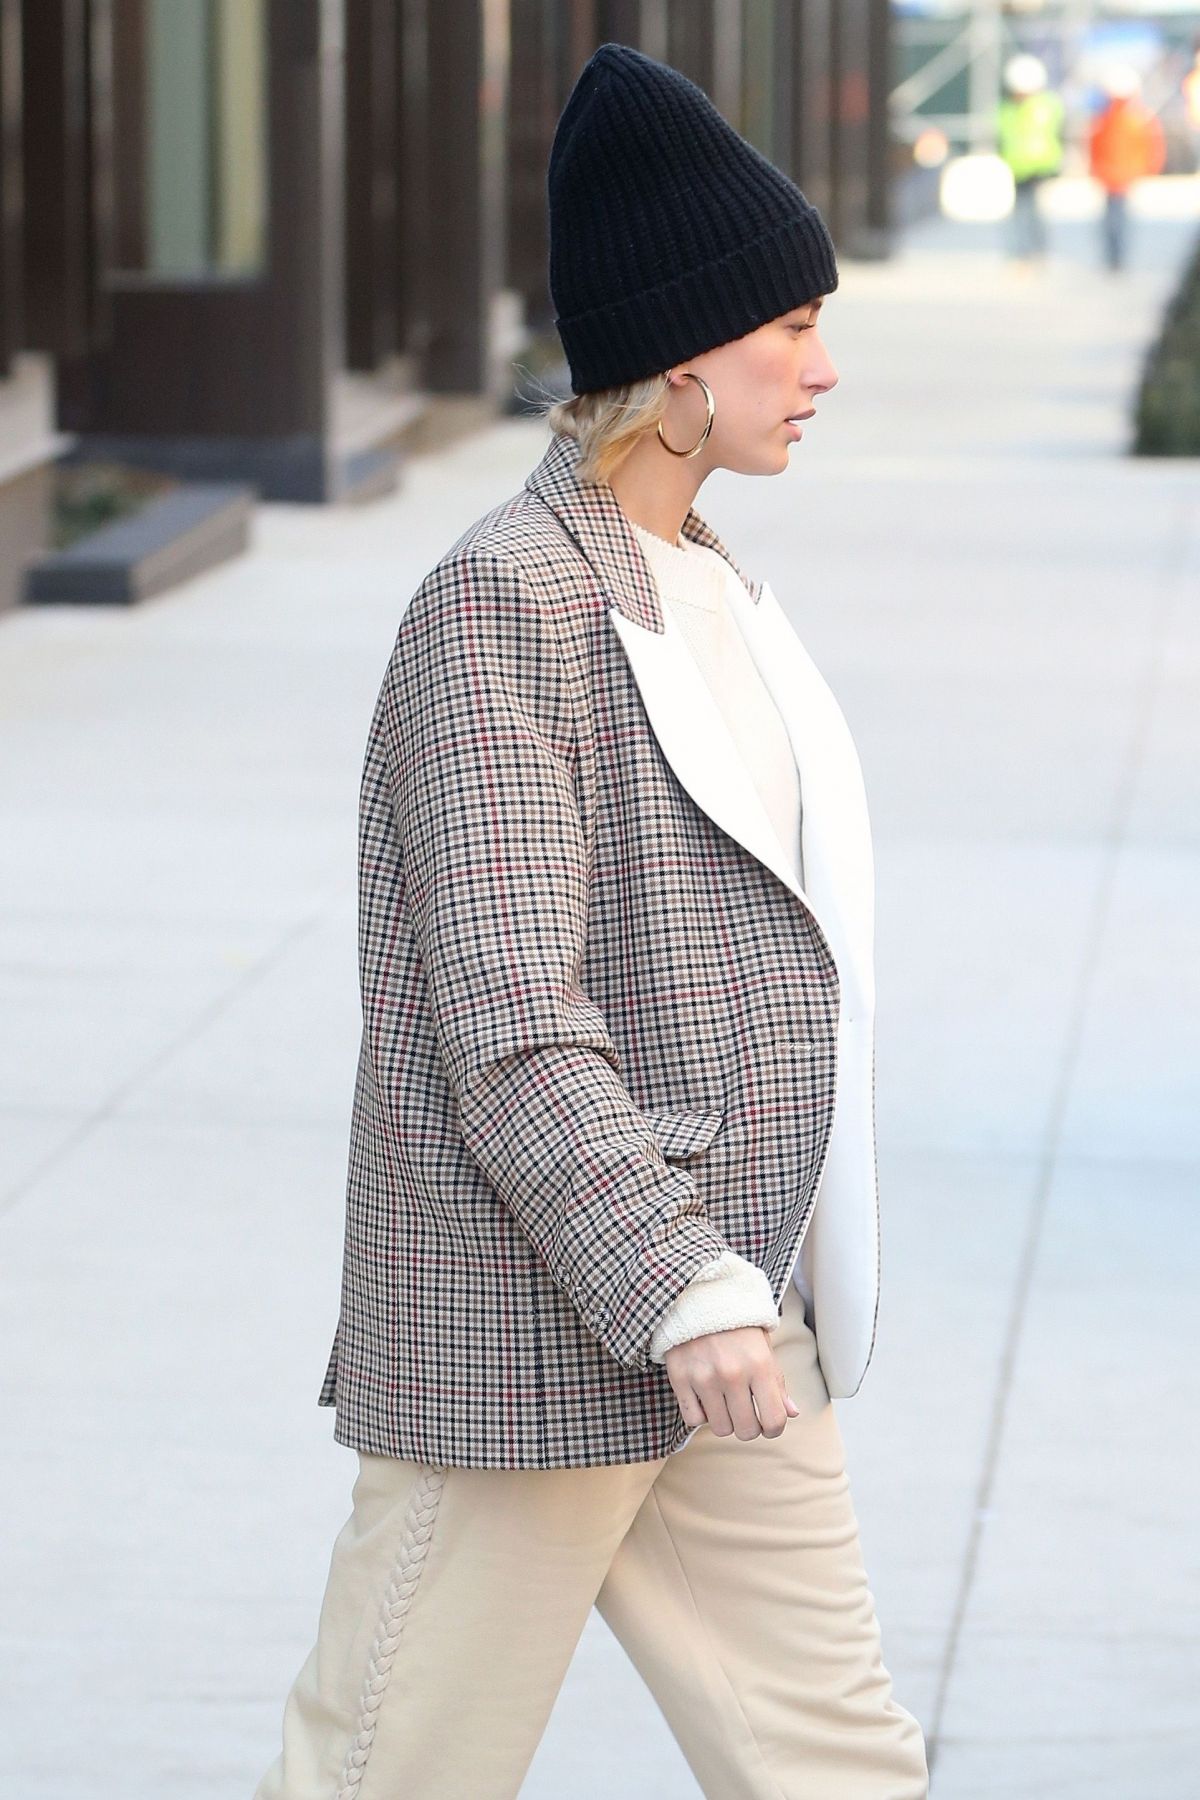 hailey-bieber-out-and-about-in-new-york-02-26-2019-2.jpg